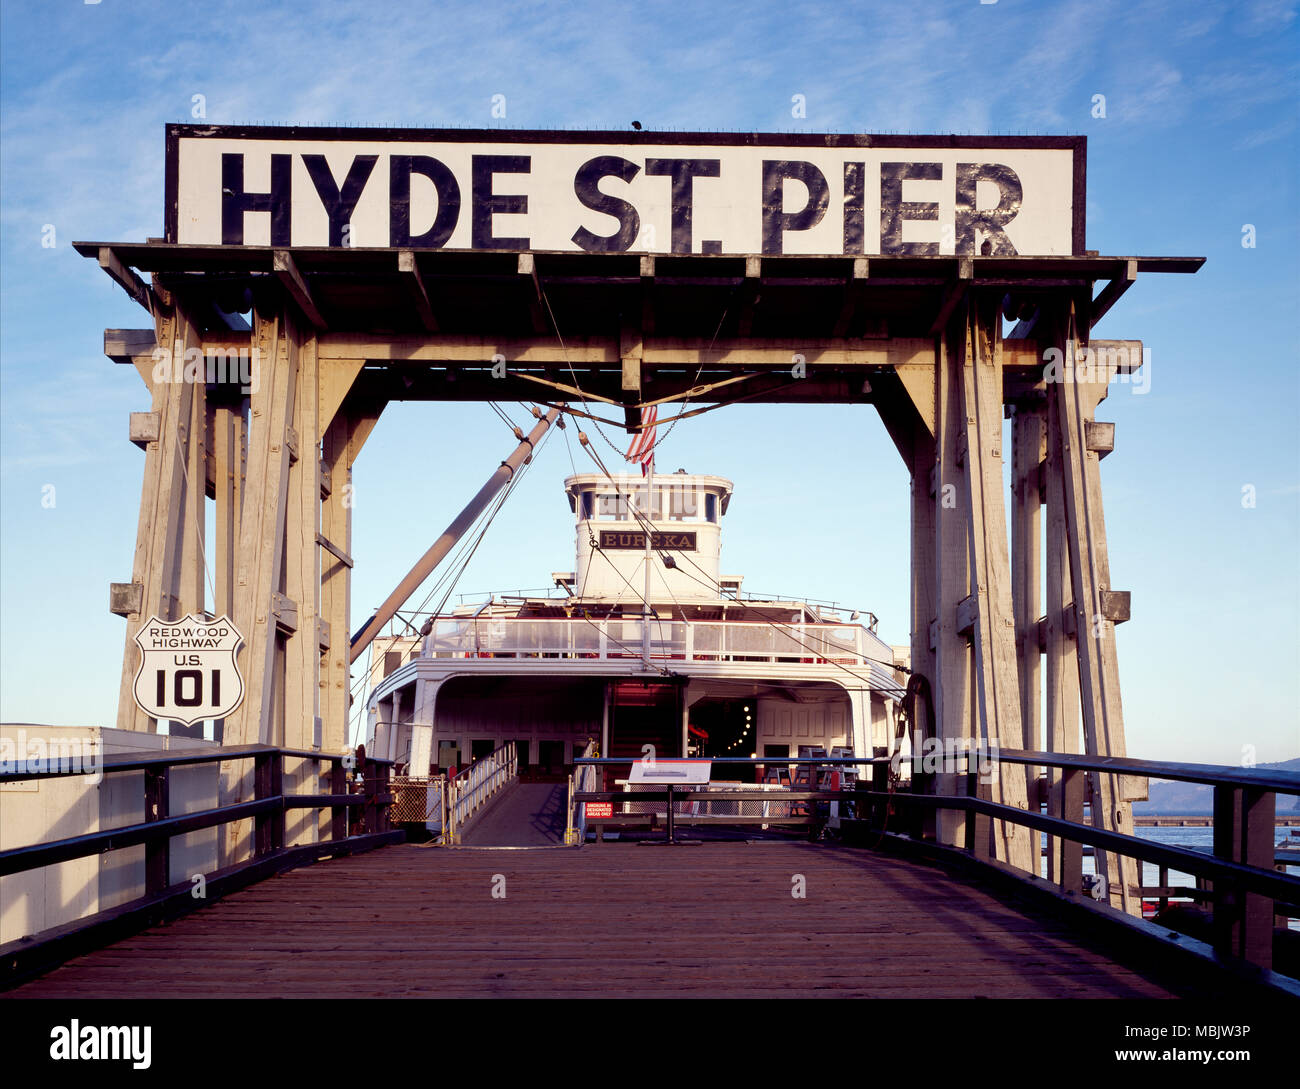 Hyde Street Pier - Fisherman's Wharf Banque D'Images